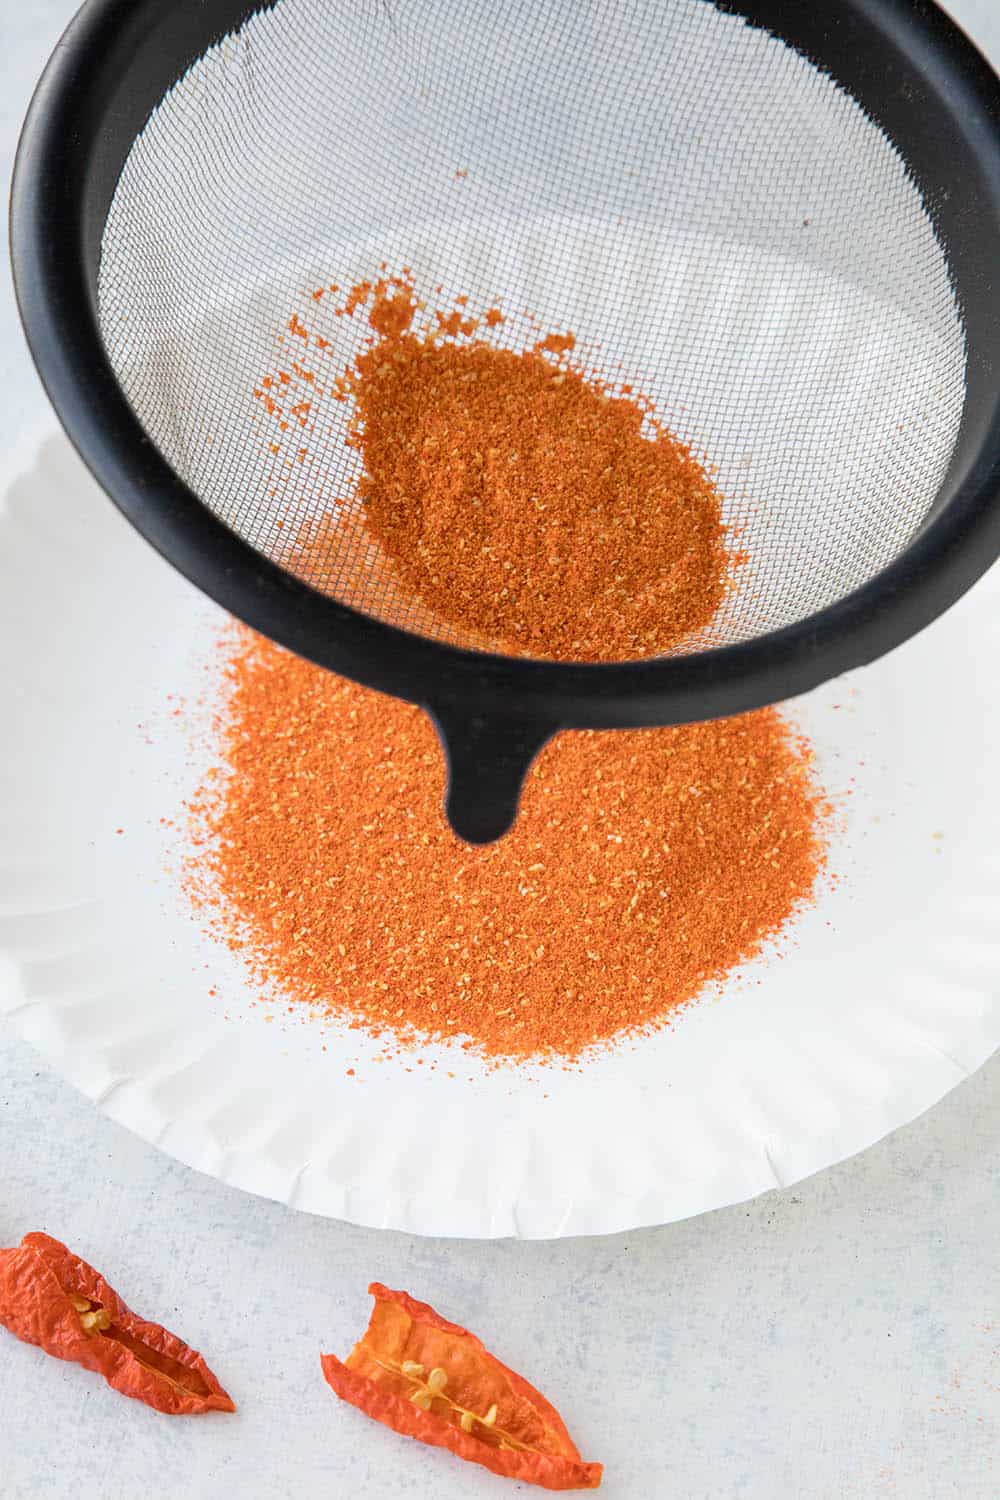 Sifting Ground Ghost Pepper Powder